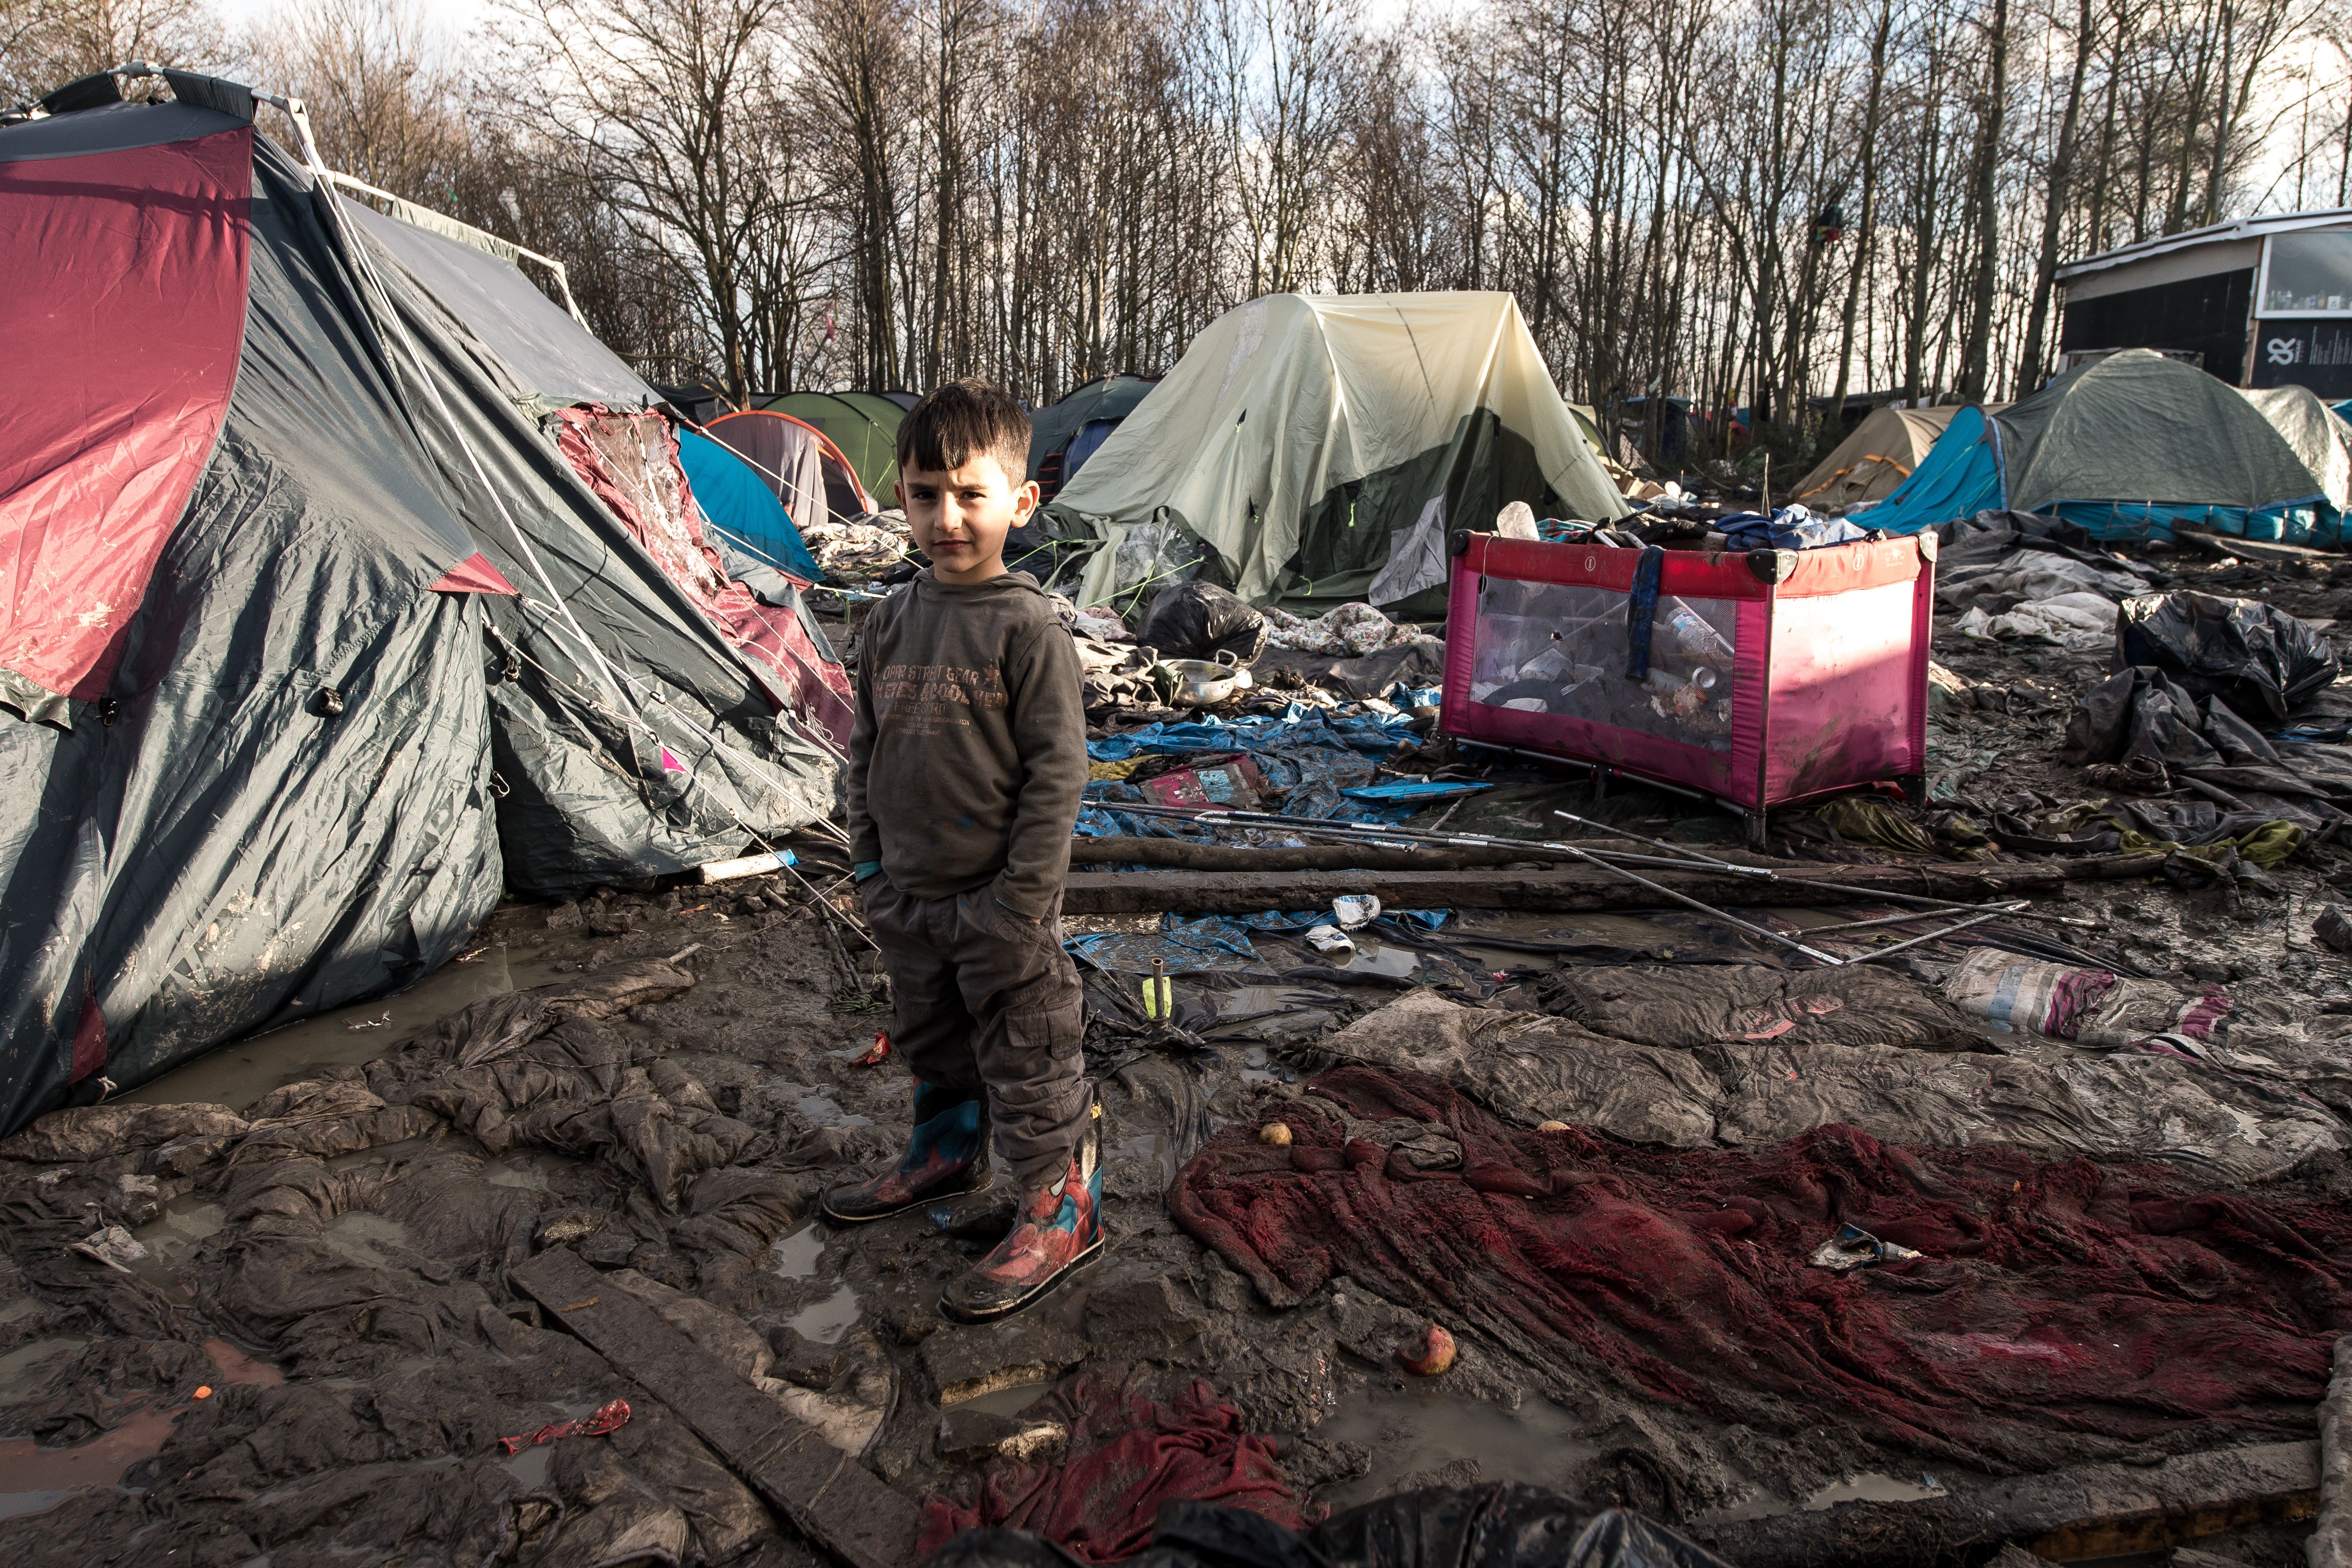 A boy poses in a migrant and refugee camp in Grande-Synthe near Dunkirk, northern France